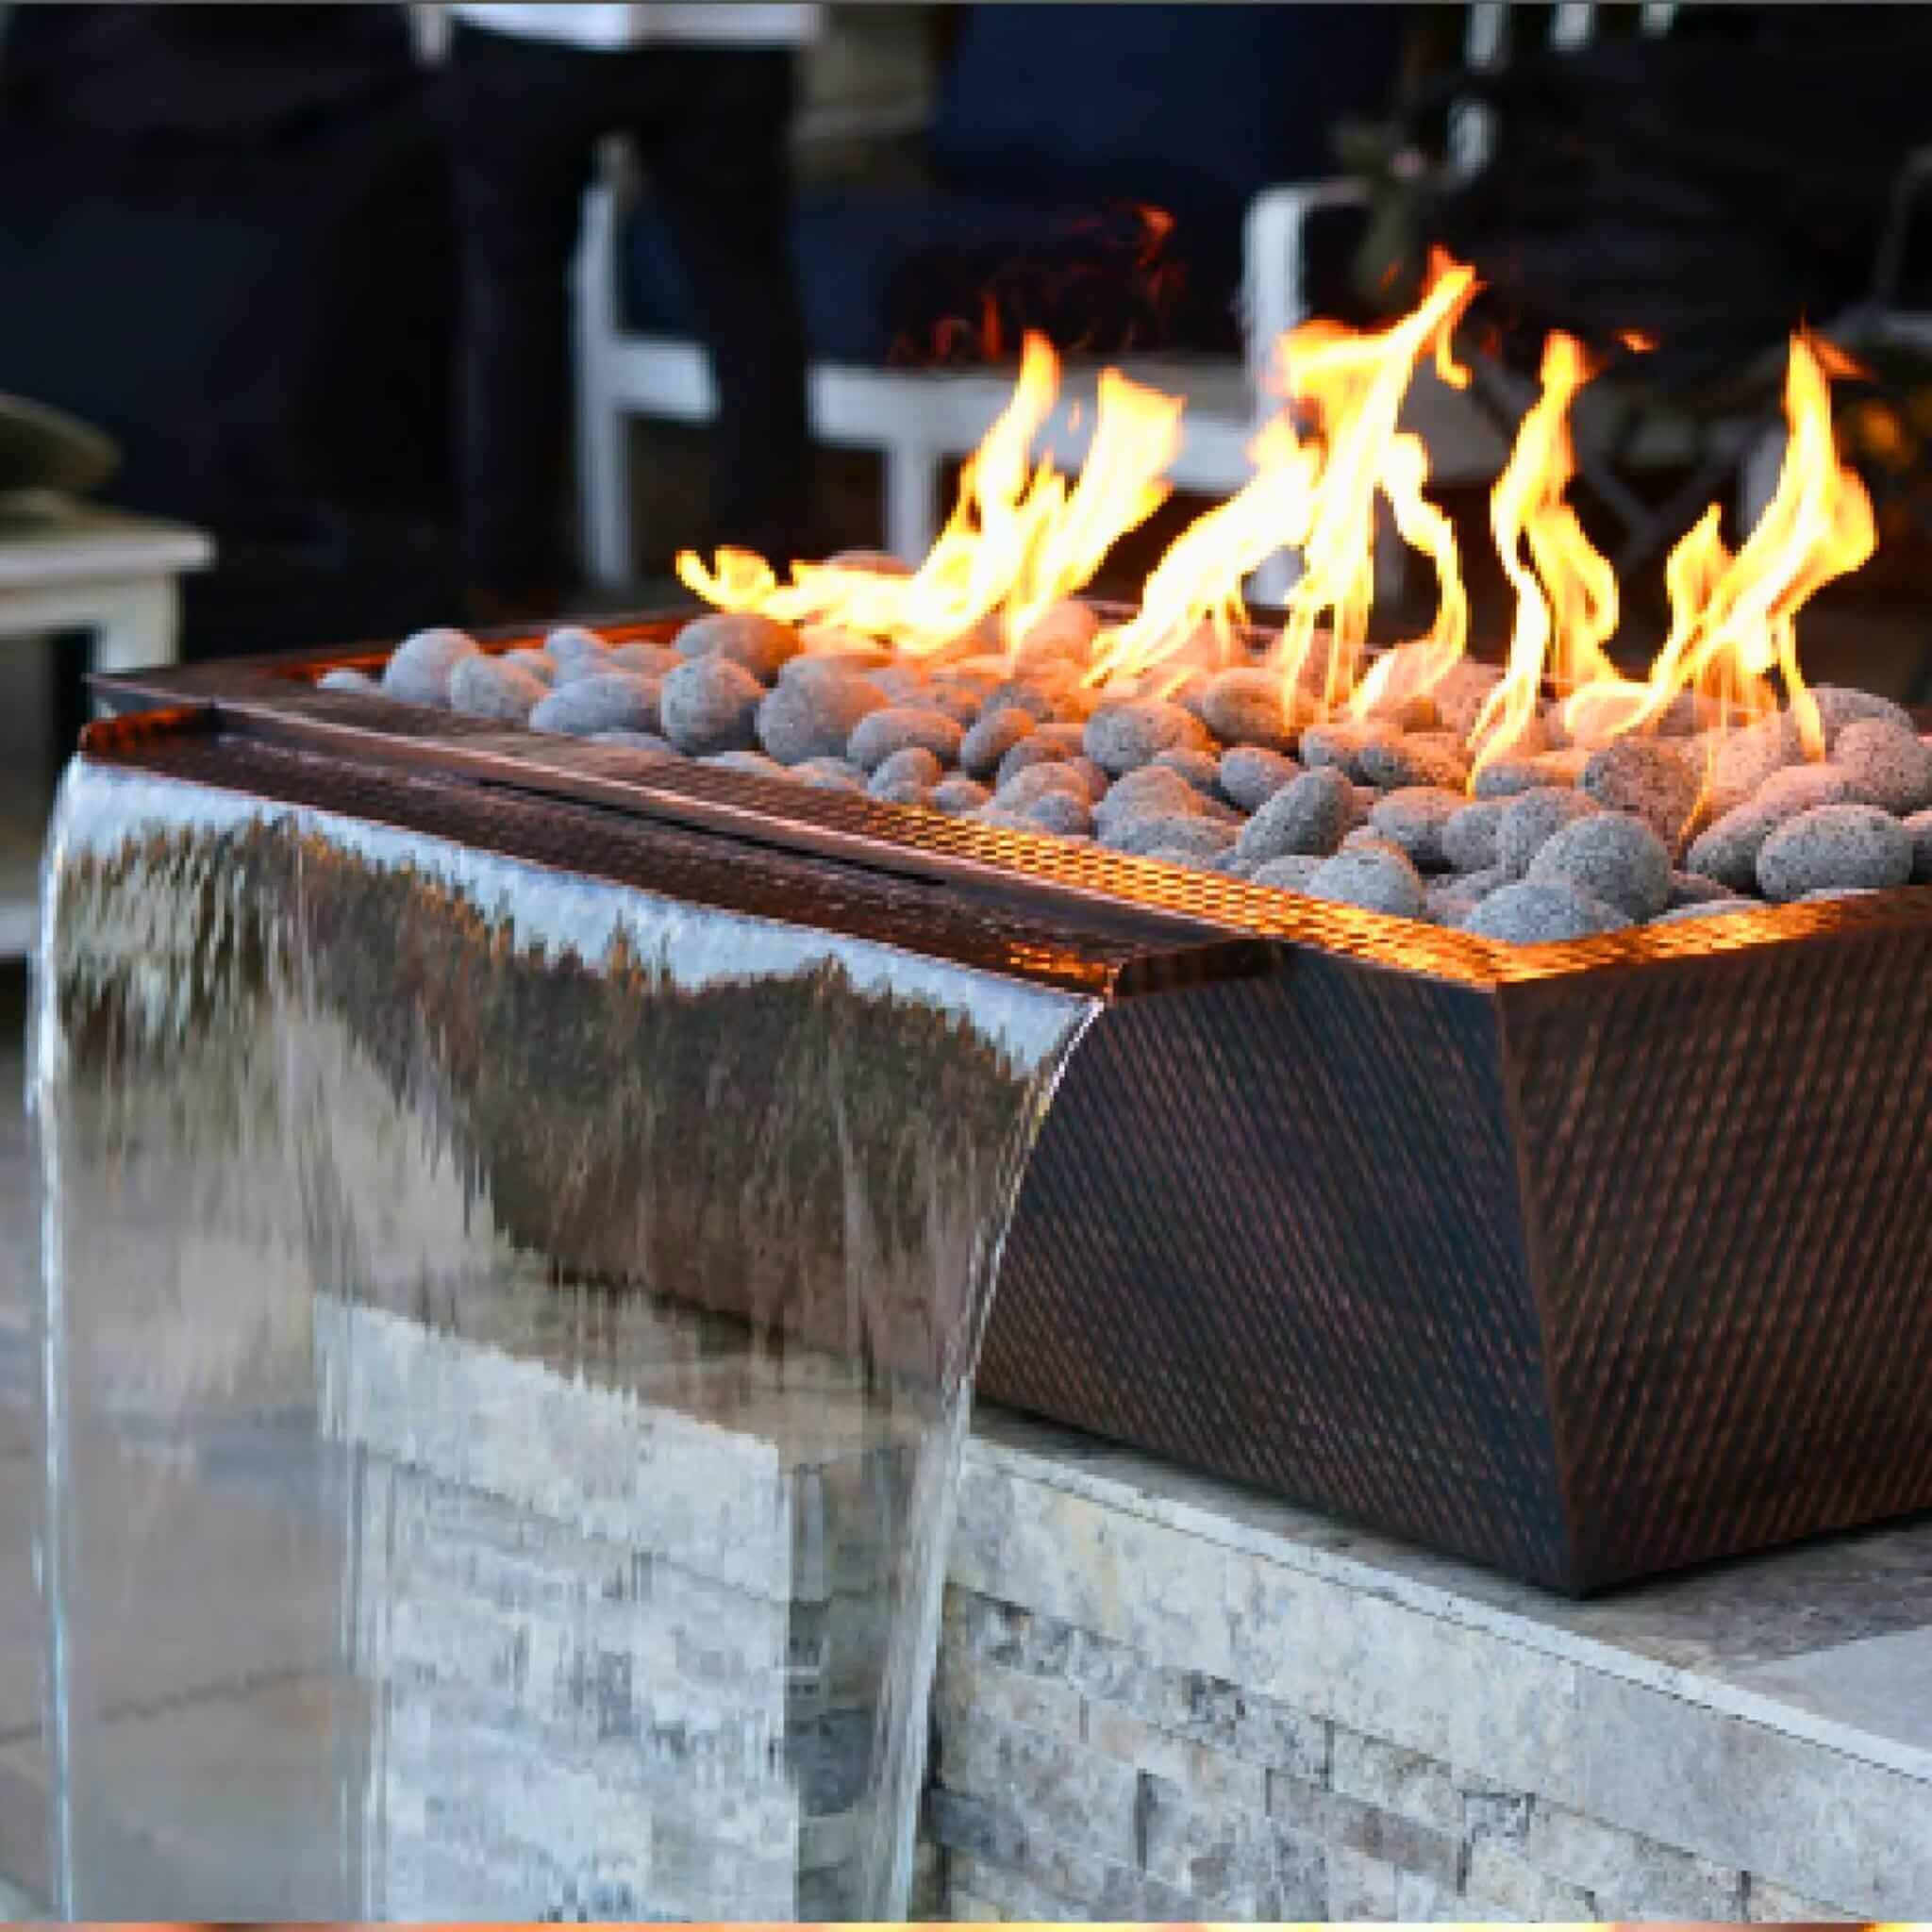 "Maya" Linear Concrete Fire & Water Bowl - The Outdoor Plus